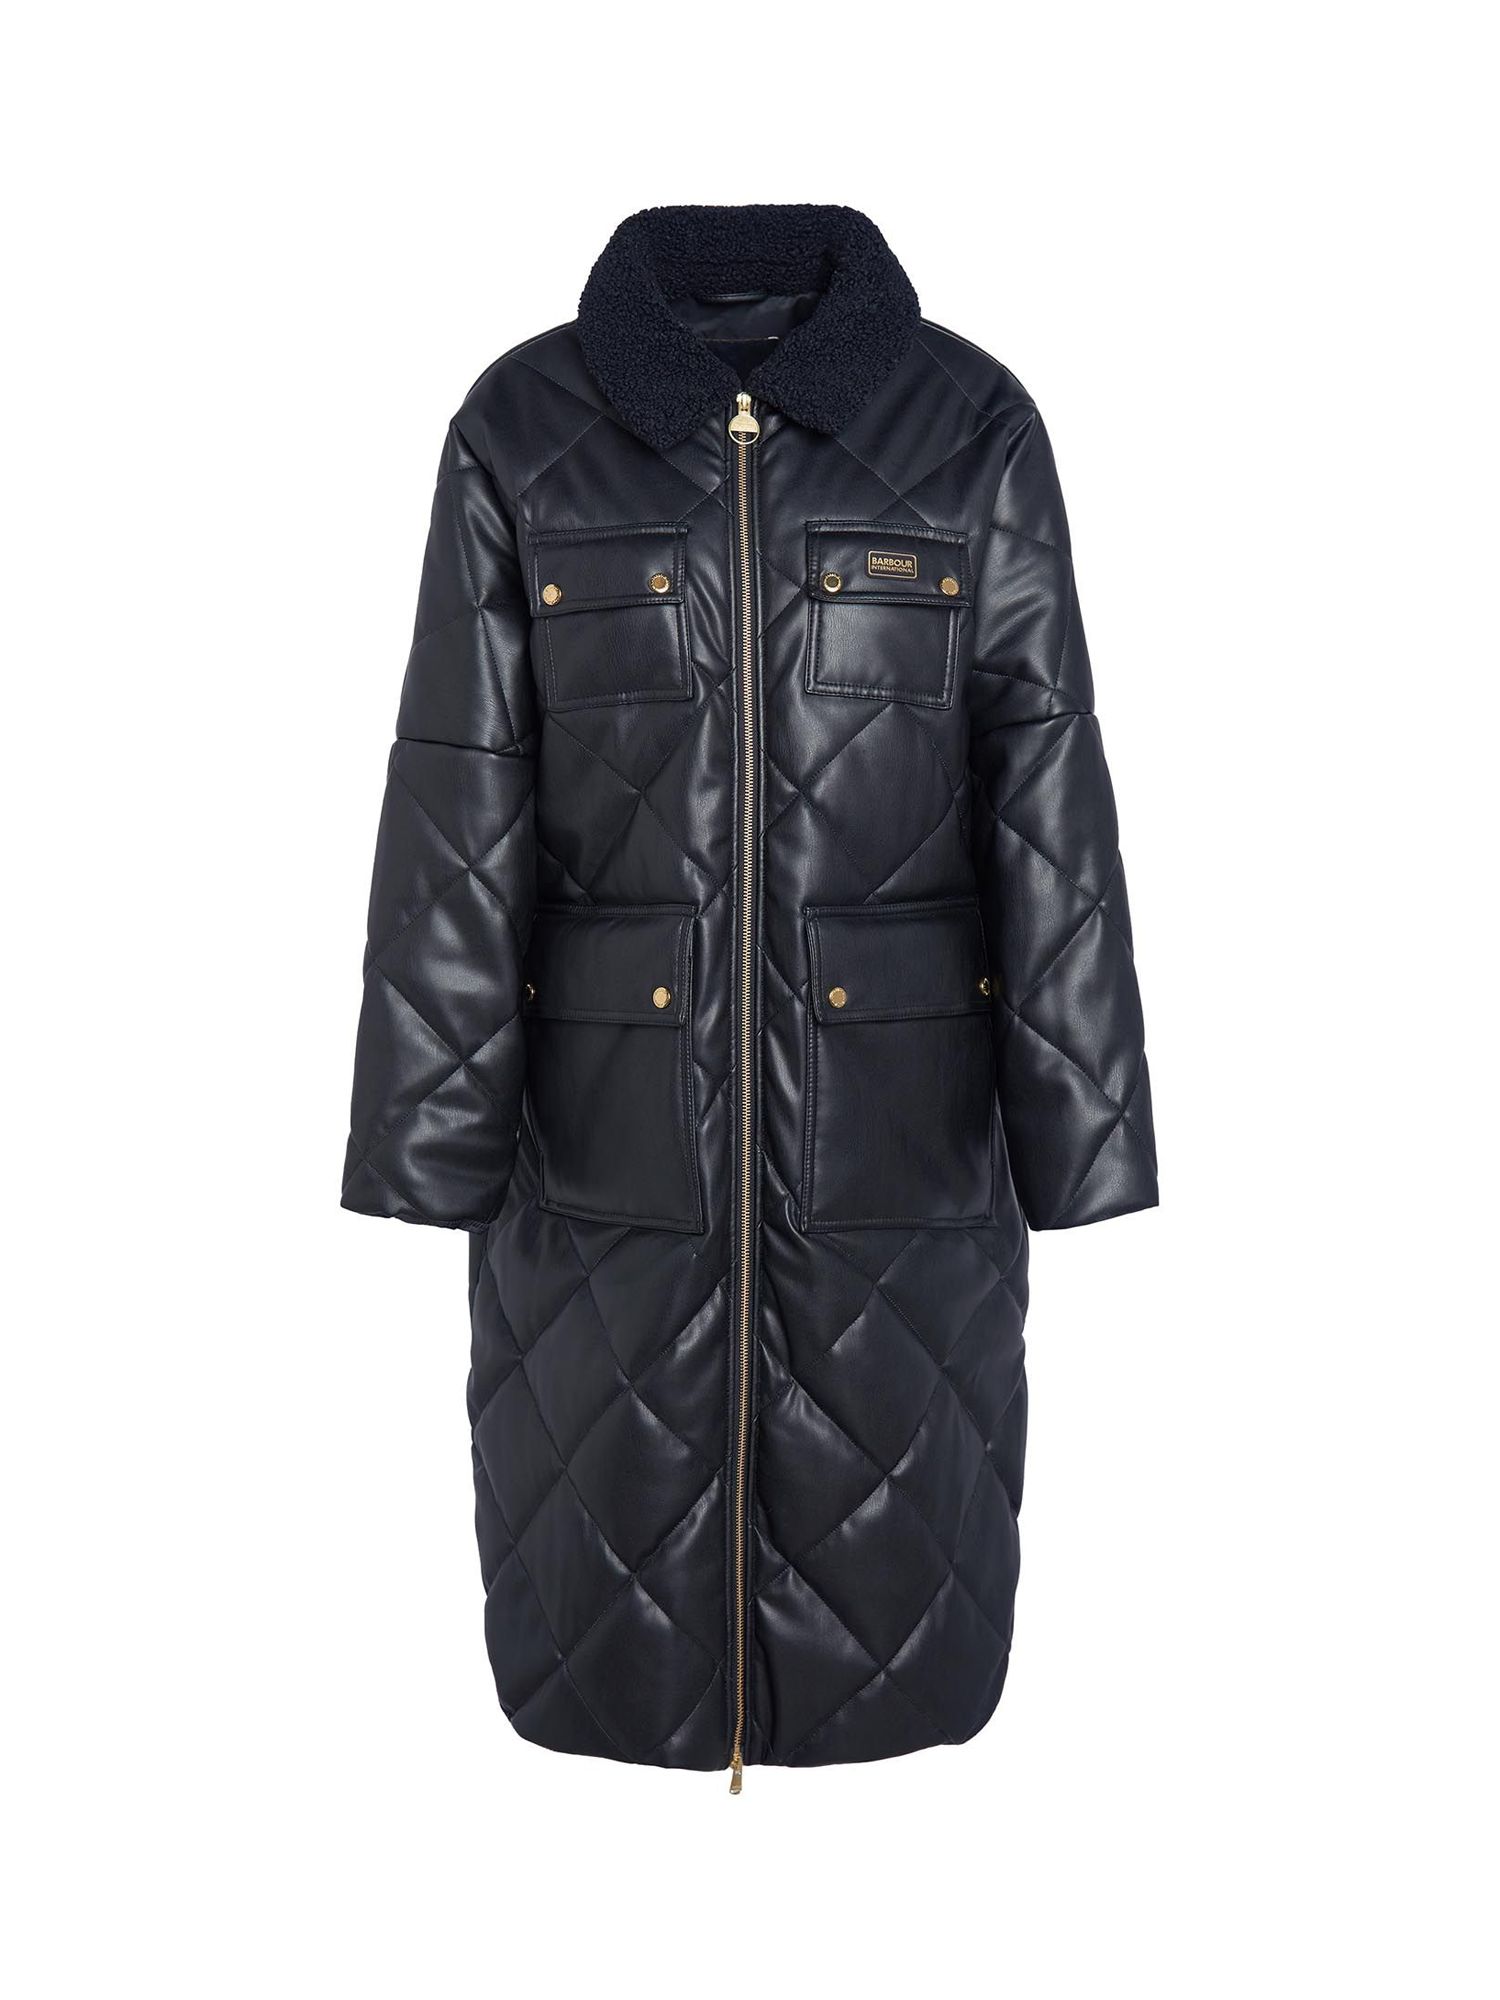 Buy Barbour International Neutron Faux Leather Quilted Jacket, Black Online at johnlewis.com